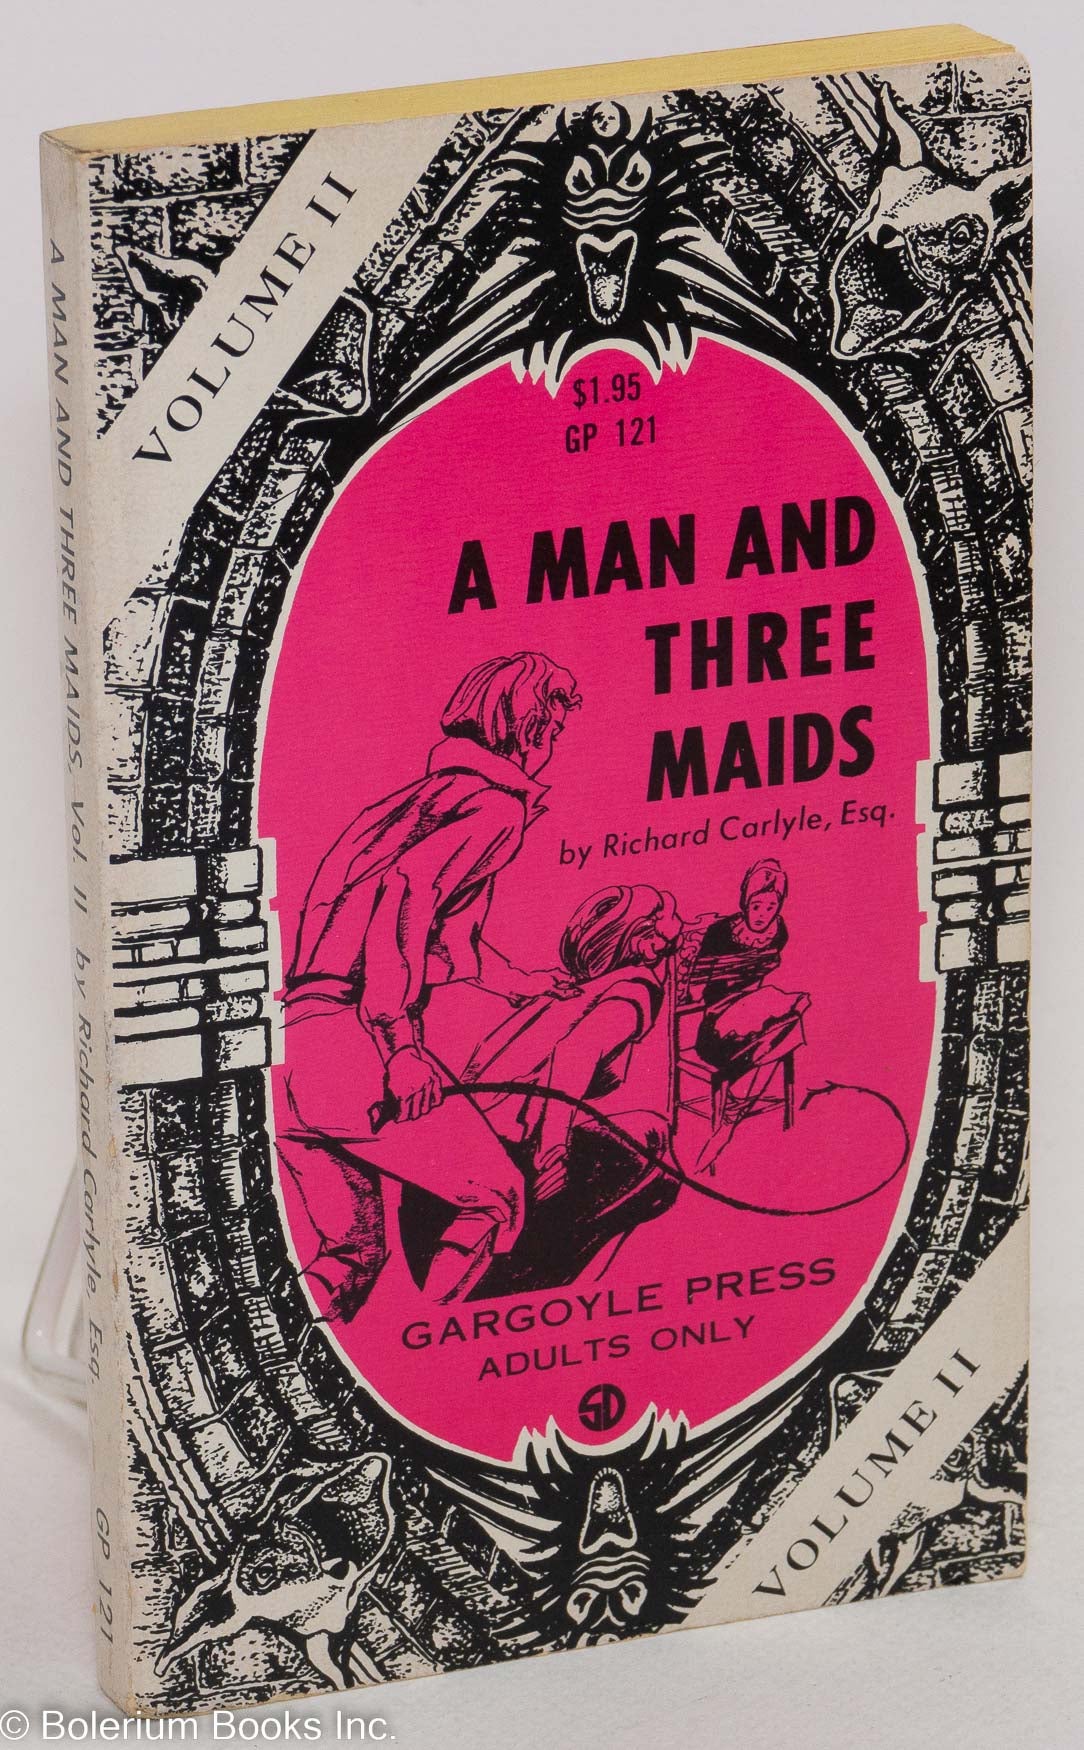 A Man With Three Maids volume II Richard Carlyle, pic